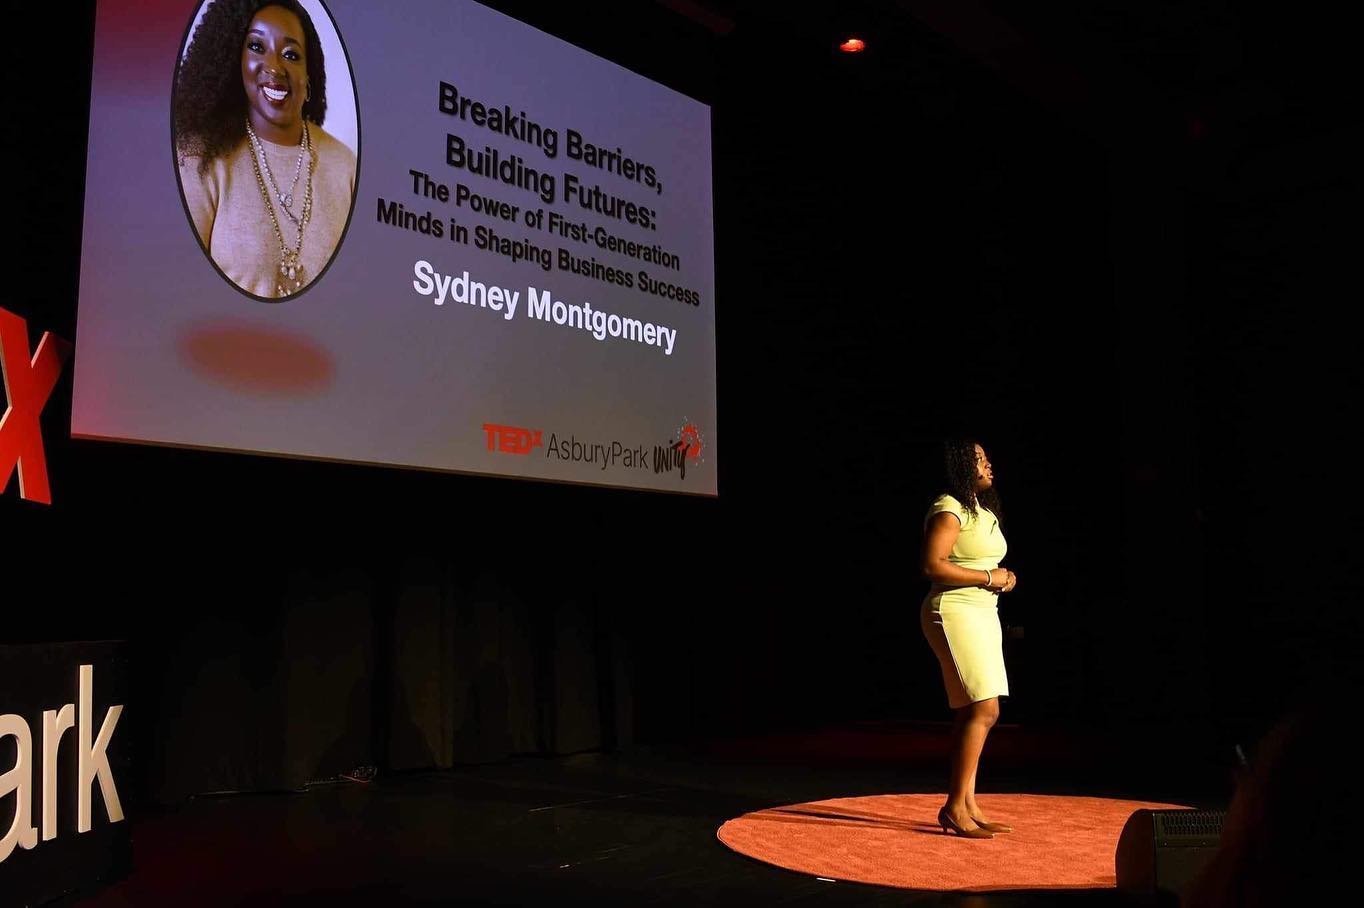 About last weekend! 

Thank you to @tedxasburypark for the platform for me to speak about the power of first-generation college students and their ability to drive business innovation and success. 

My heart is so full. I&rsquo;m so grateful to God f